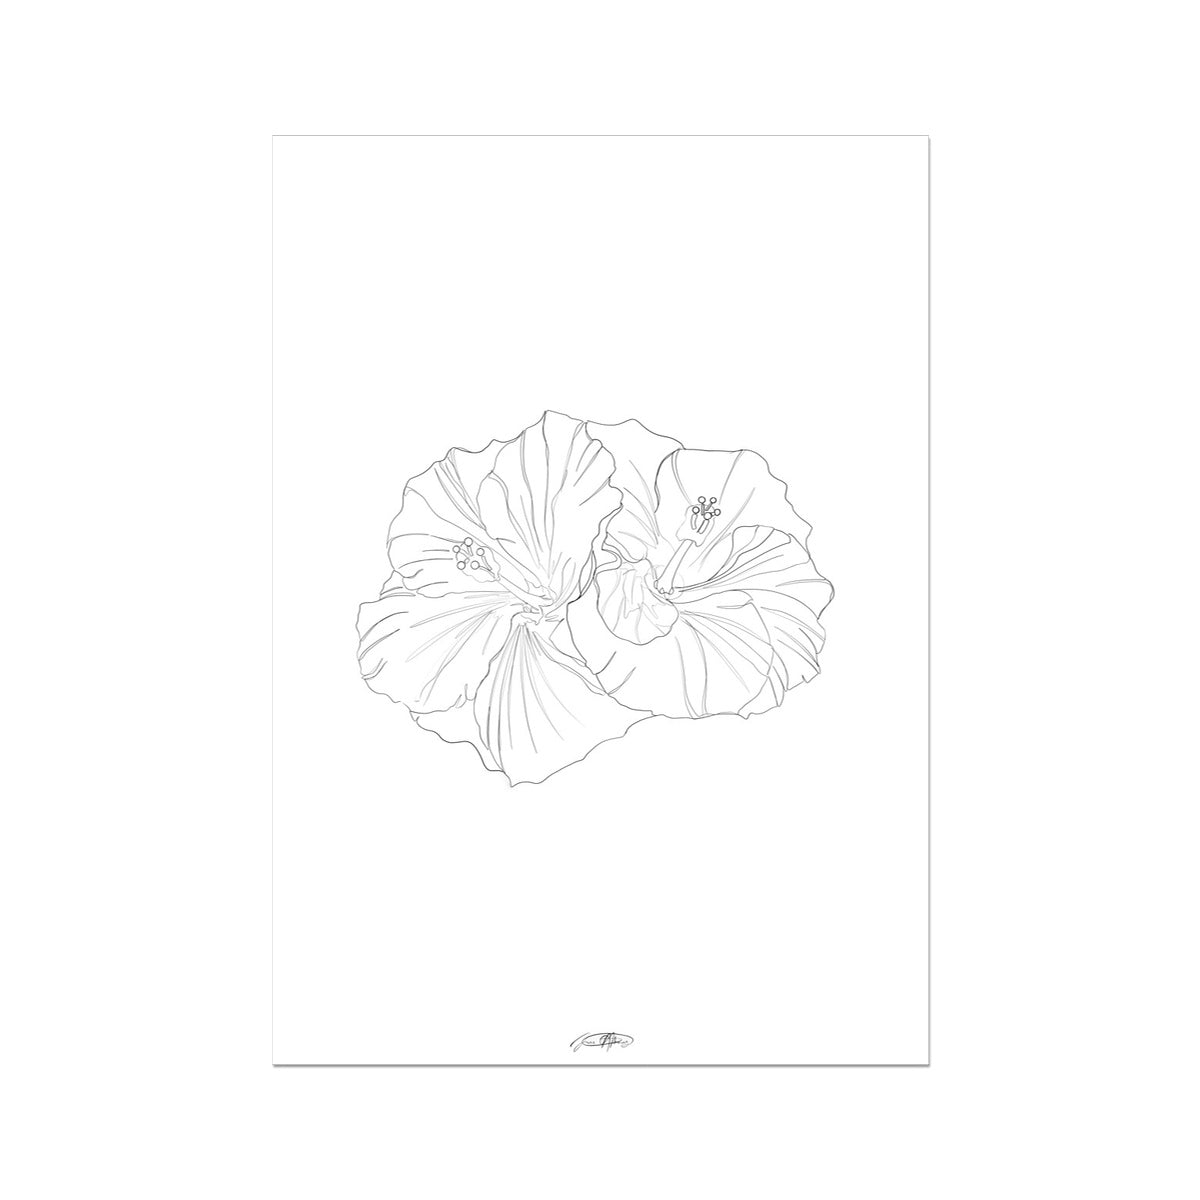 © les muses / Our line art collection of art prints features original line art drawings, delicately drawn,
of female figures and fashion photography. Simple feminine line art posters perfect for those
looking for visually stunning original artwork with beautiful intricate detail.